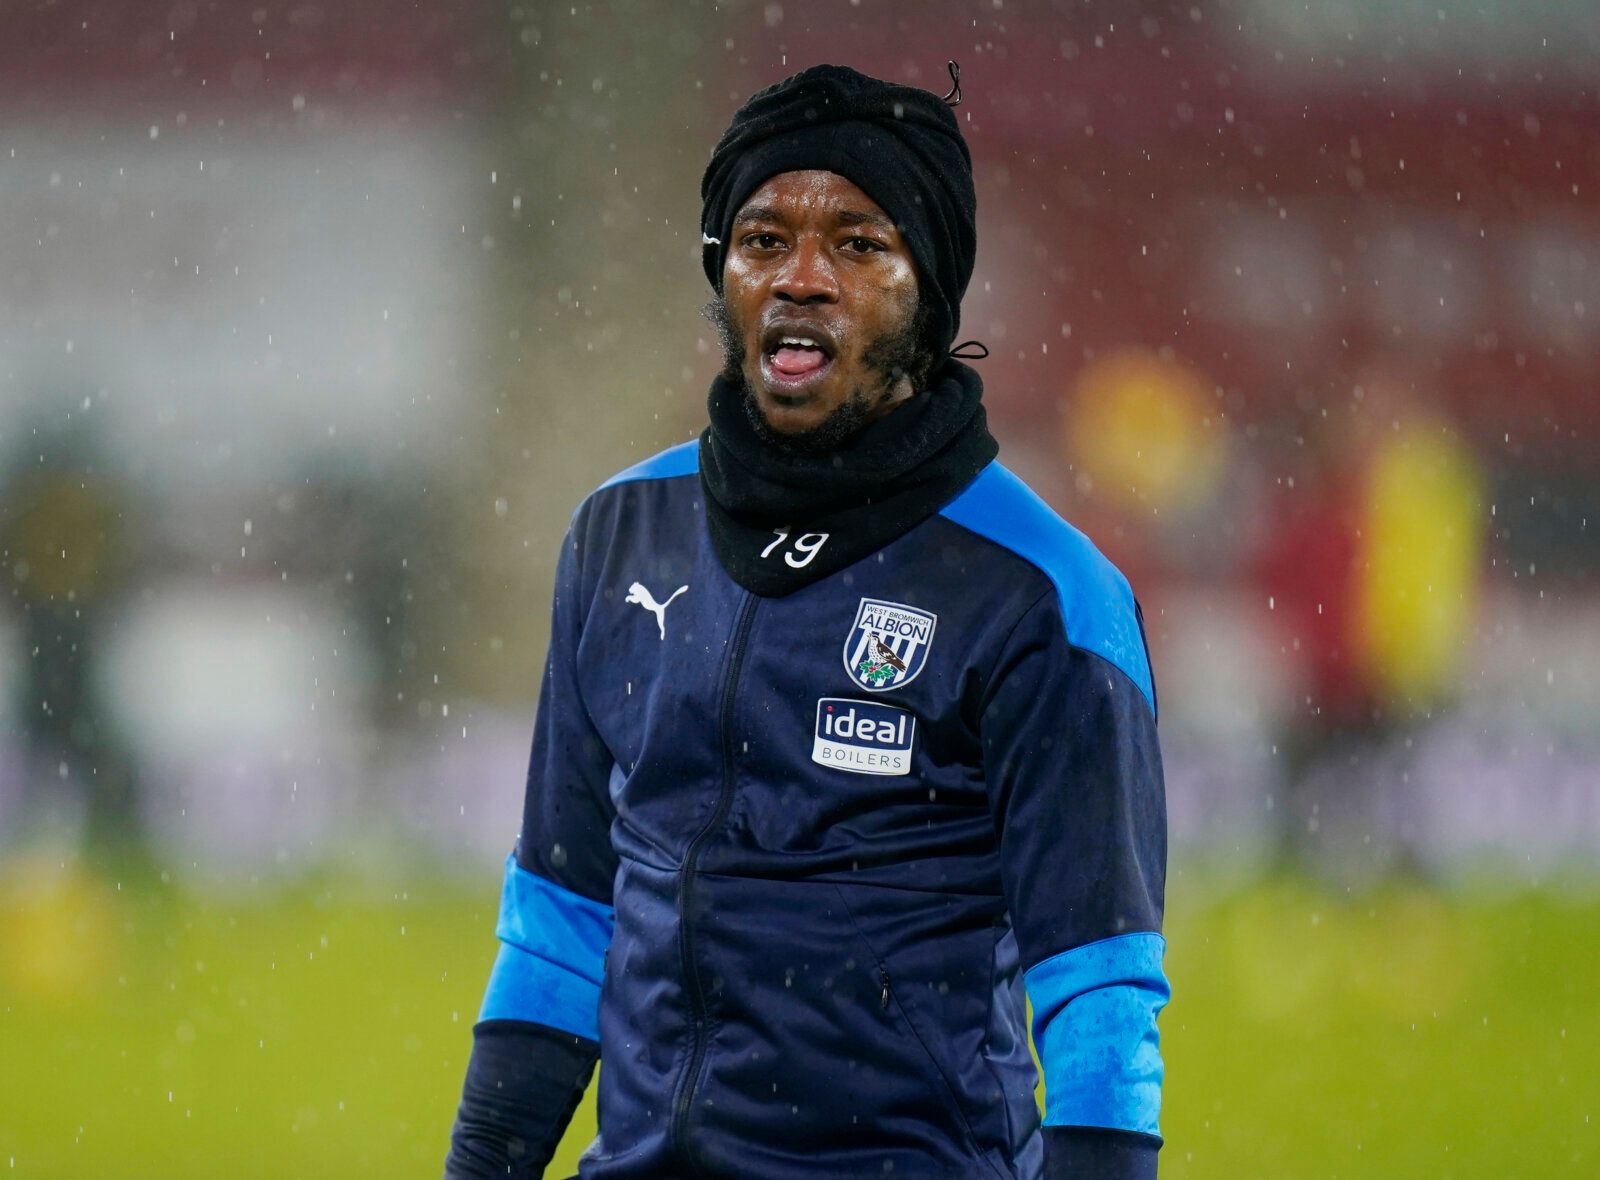 Soccer Football - Premier League - Sheffield United v West Bromwich Albion - Bramall Lane, Sheffield, Britain - February 2, 2021 West Bromwich Albion's Romaine Sawyers during the warm up before the match Pool via REUTERS/Tim Keeton EDITORIAL USE ONLY. No use with unauthorized audio, video, data, fixture lists, club/league logos or 'live' services. Online in-match use limited to 75 images, no video emulation. No use in betting, games or single club /league/player publications.  Please contact you